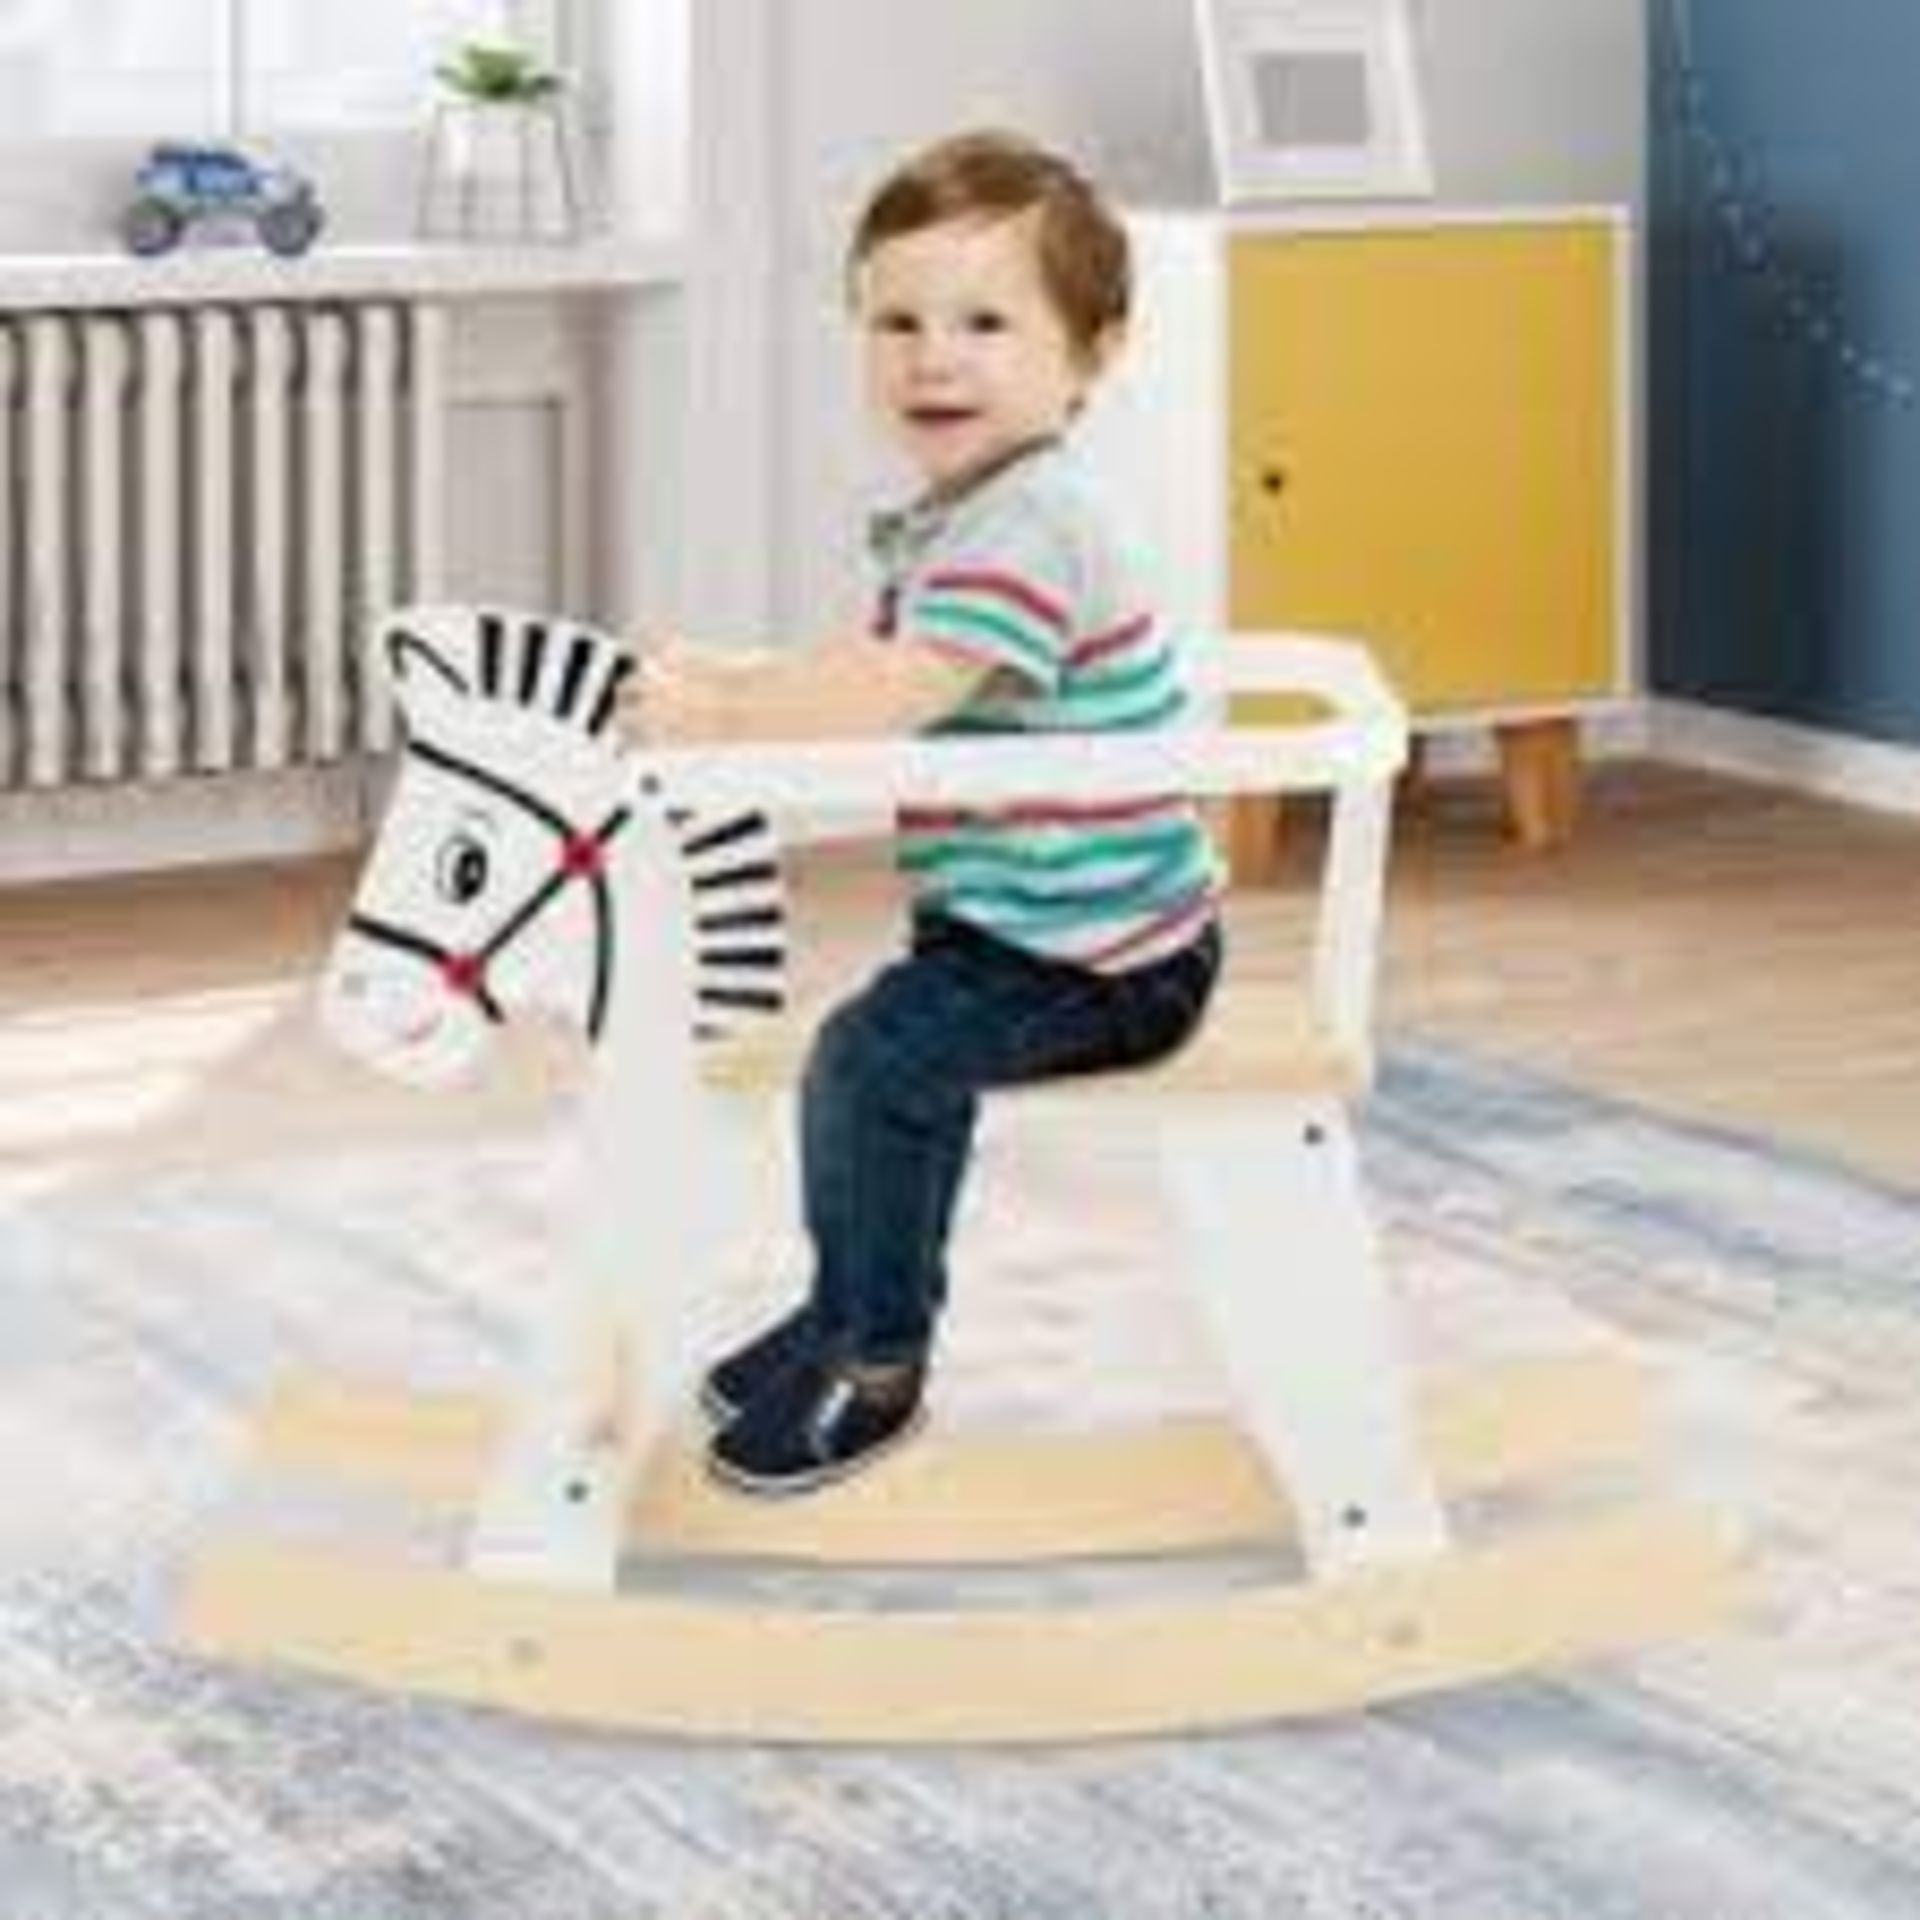 Rocking Horse. - R13.5. The curved base allows children to swing forward or backward at 11 to 22